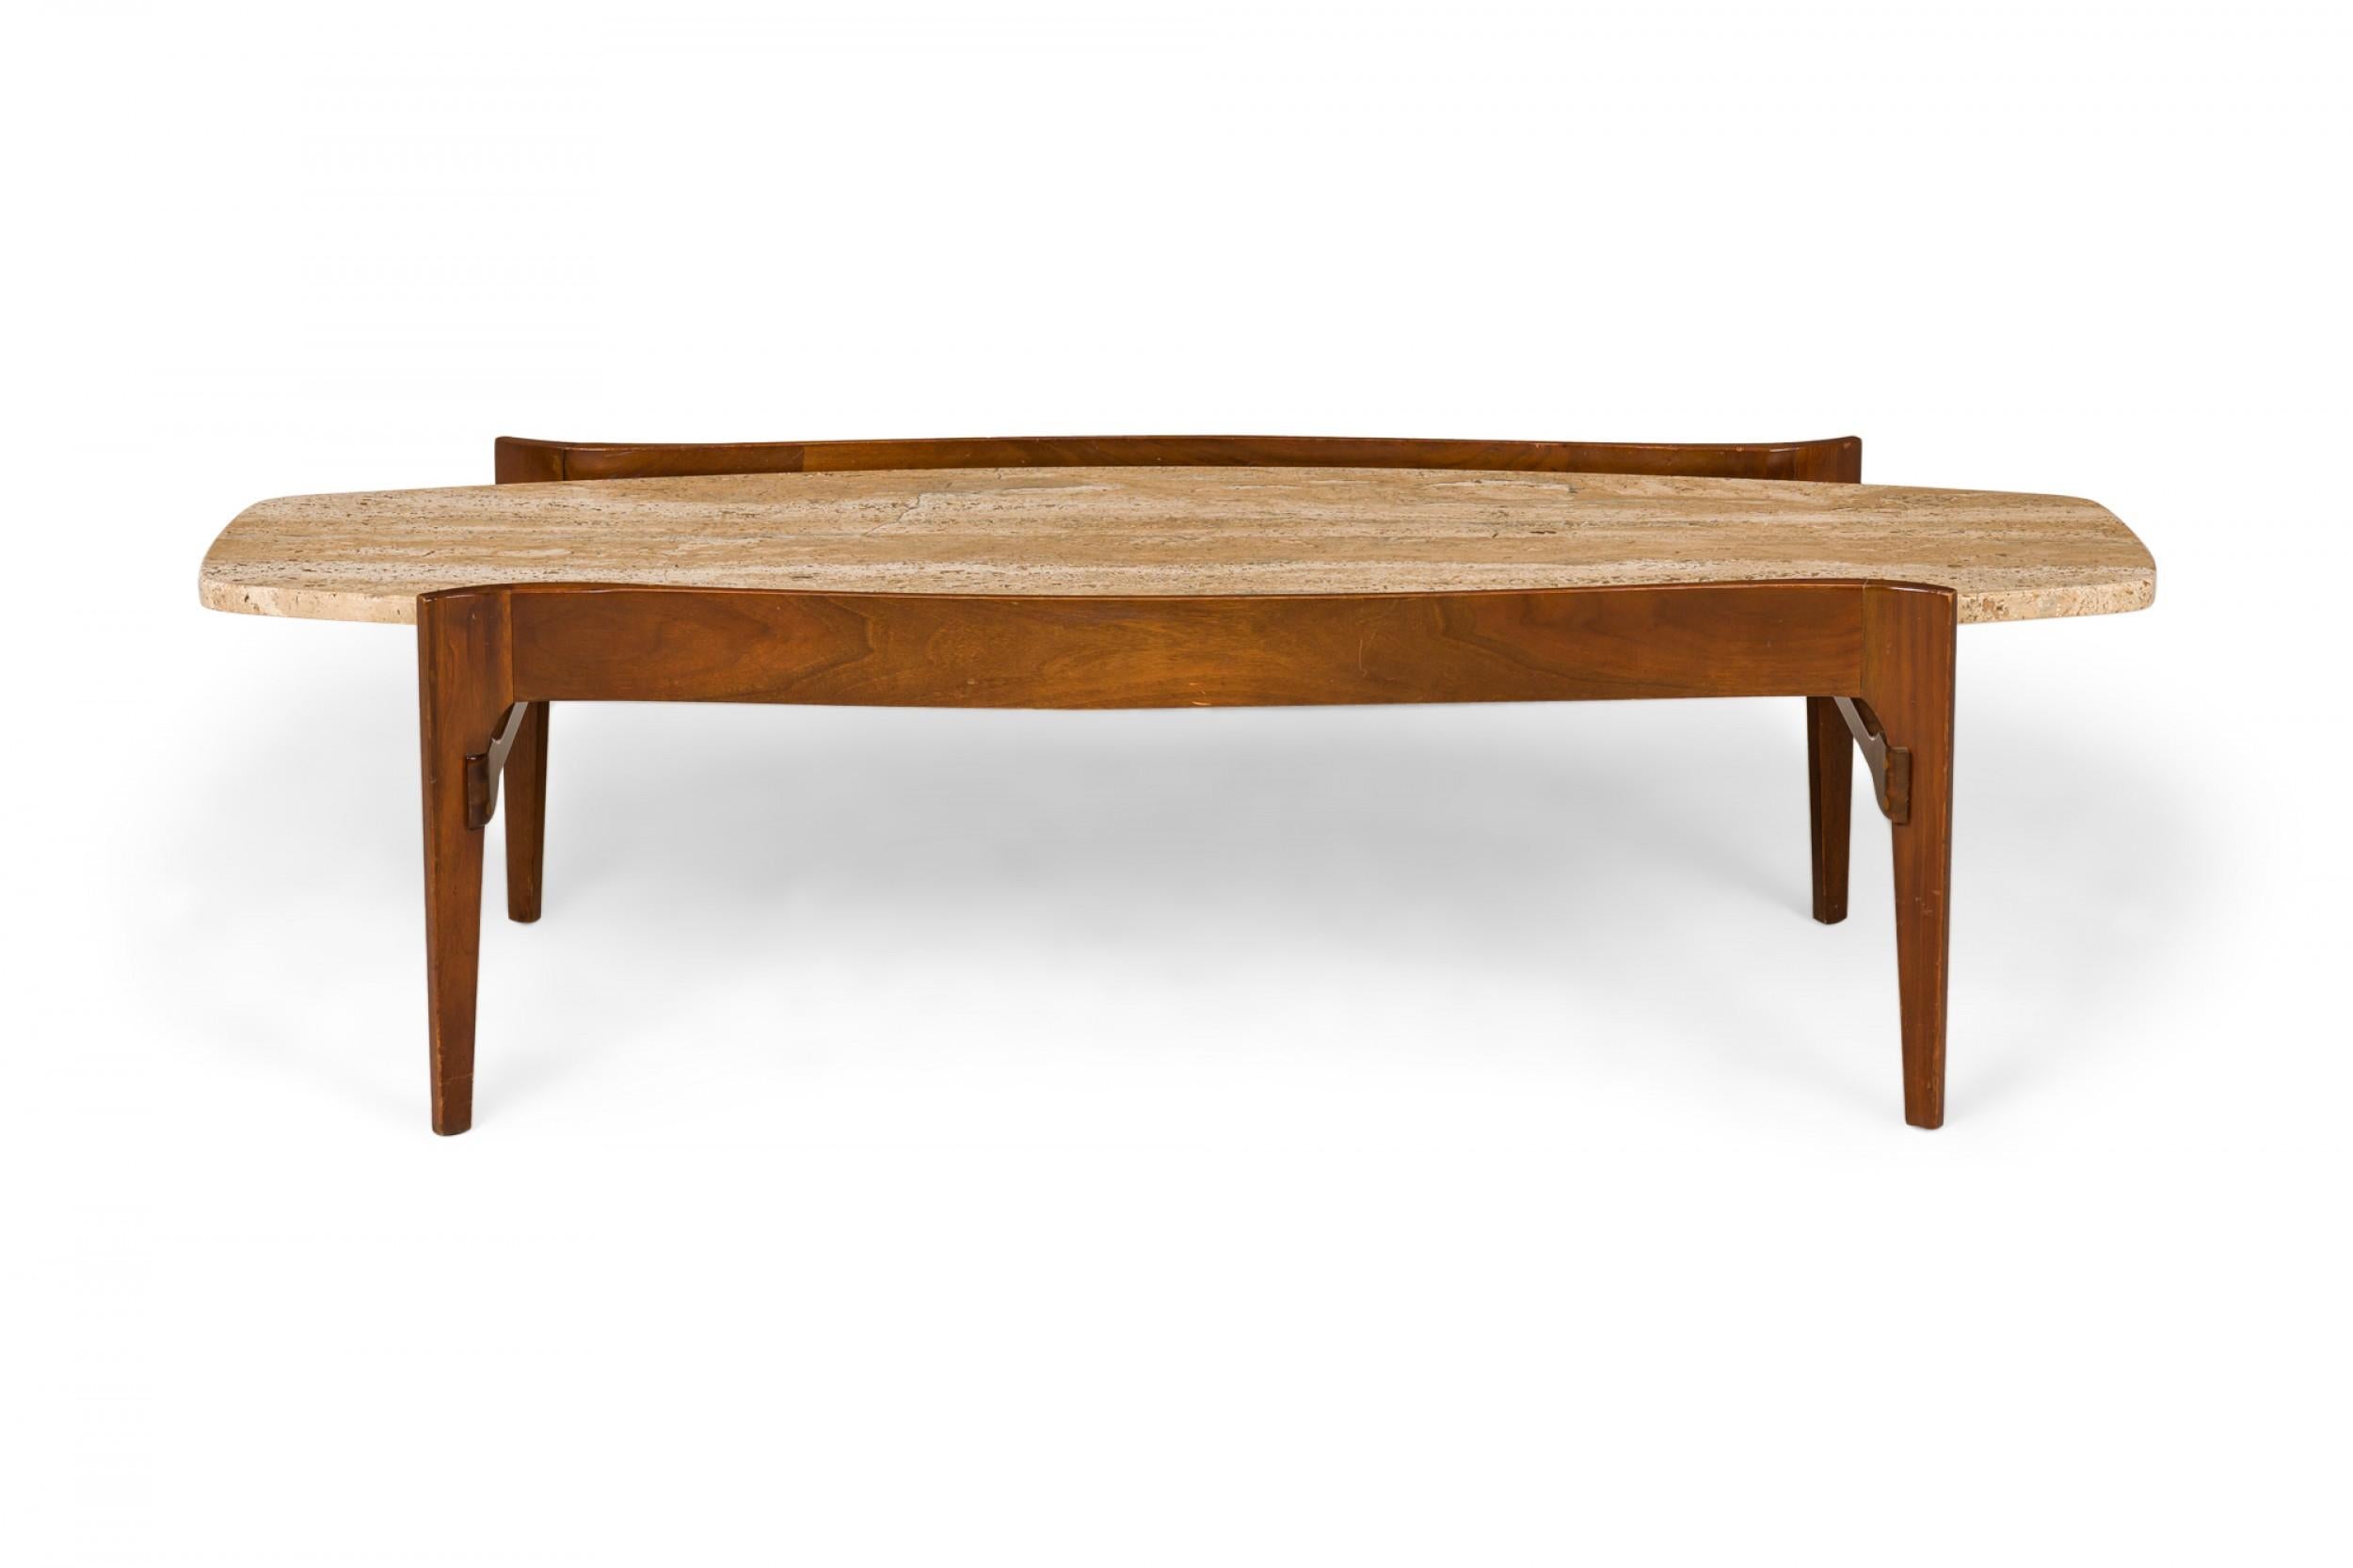 American Mid-Century coffee / cocktail table with a shaped walnut frame supporting a surfboard-shaped travertine tabletop. (GORDONS OF TENNESSEE)(Companion end tables: DUF0387)